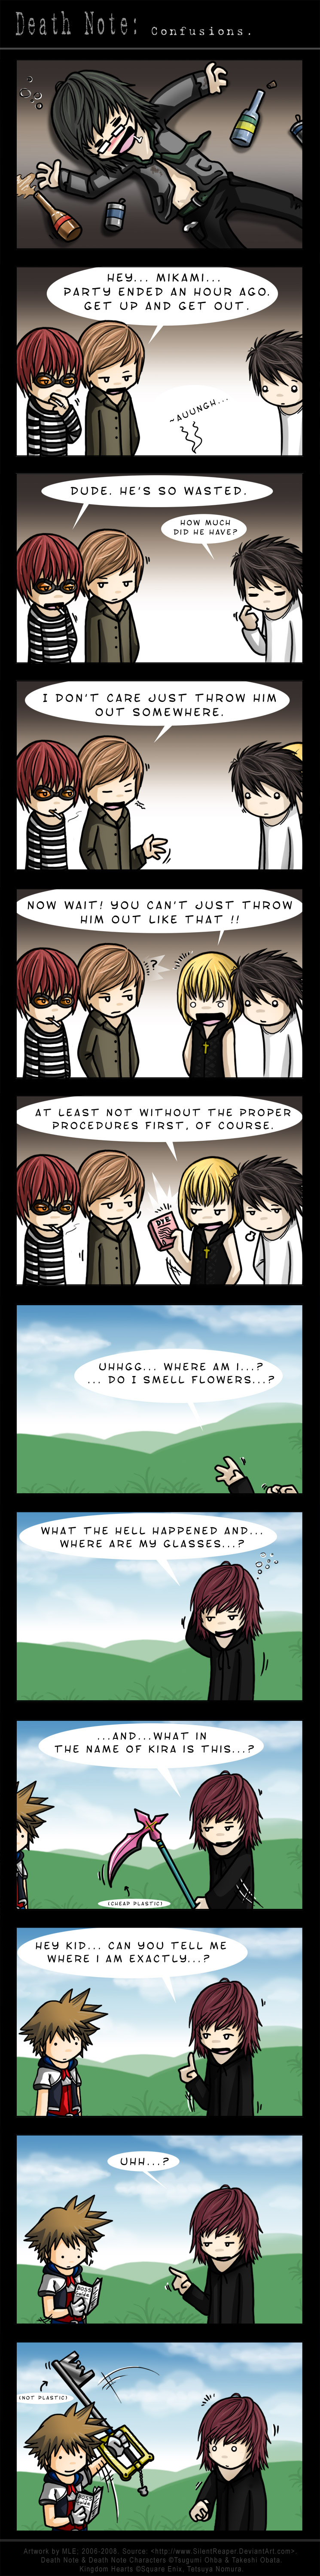 Death_Note__Confusions_by_SilentReaper.jpg